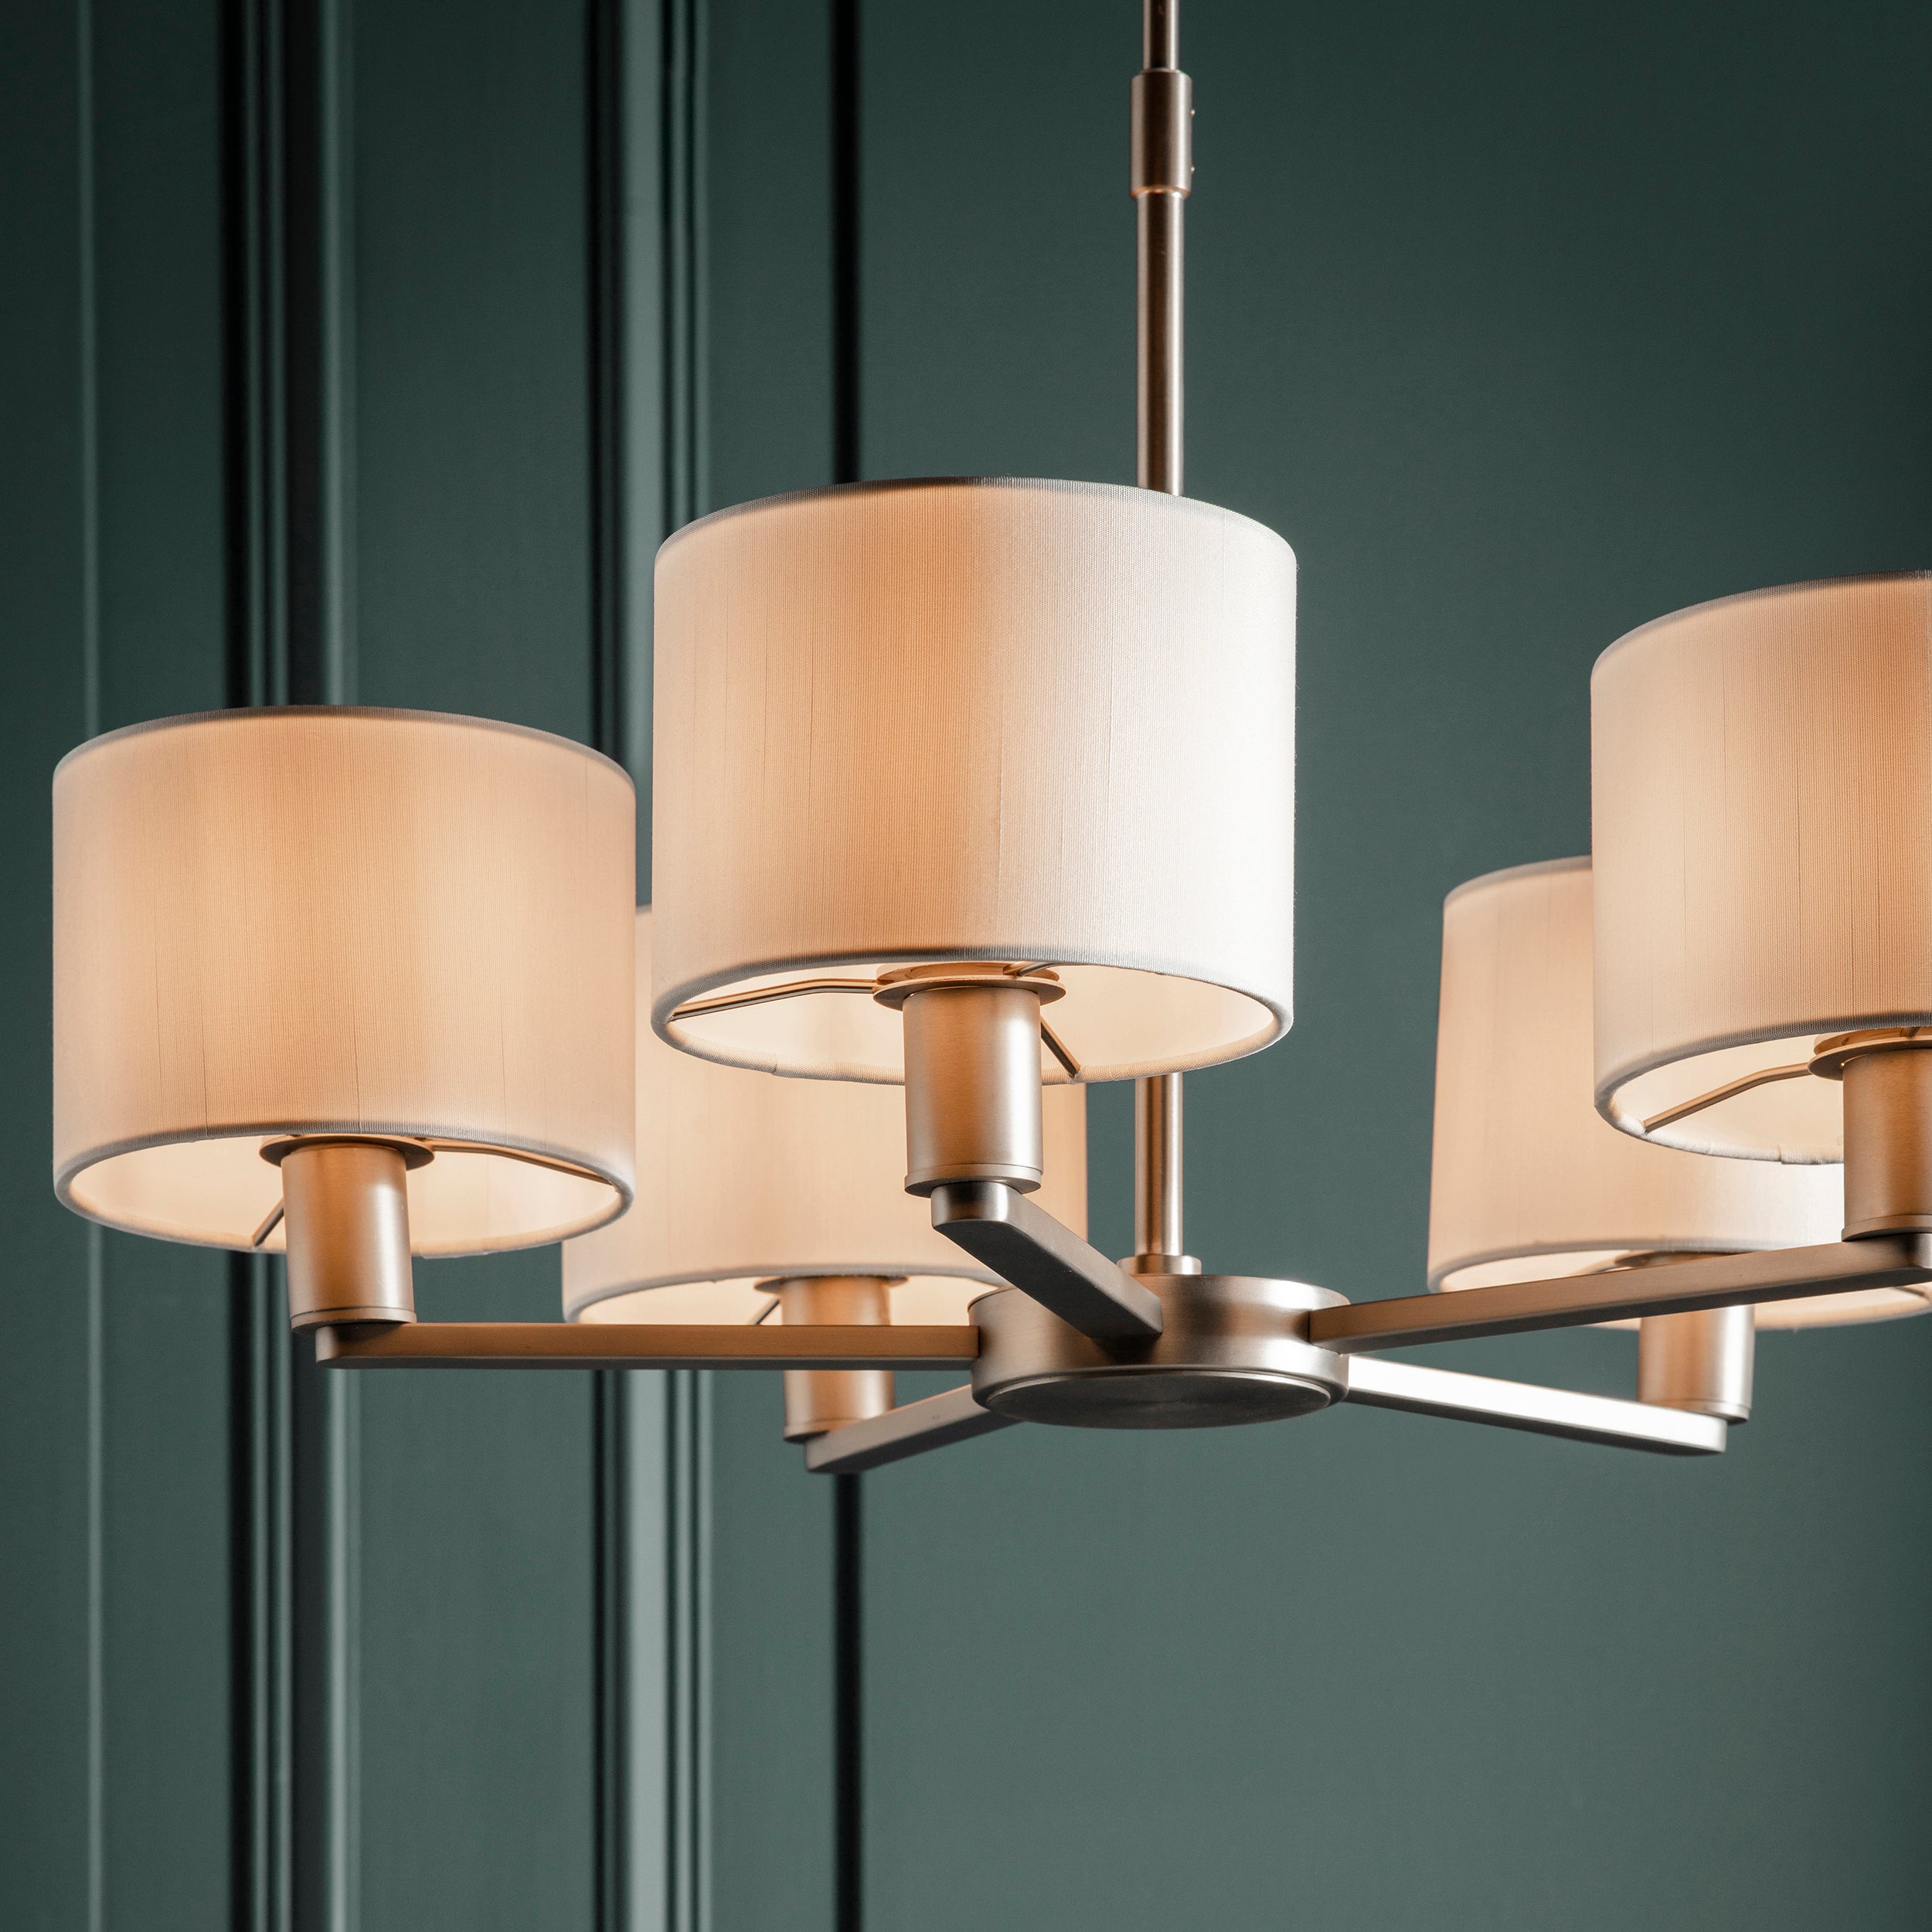 Daley 5 Light Pendant. Nickel With Vintage White Shades